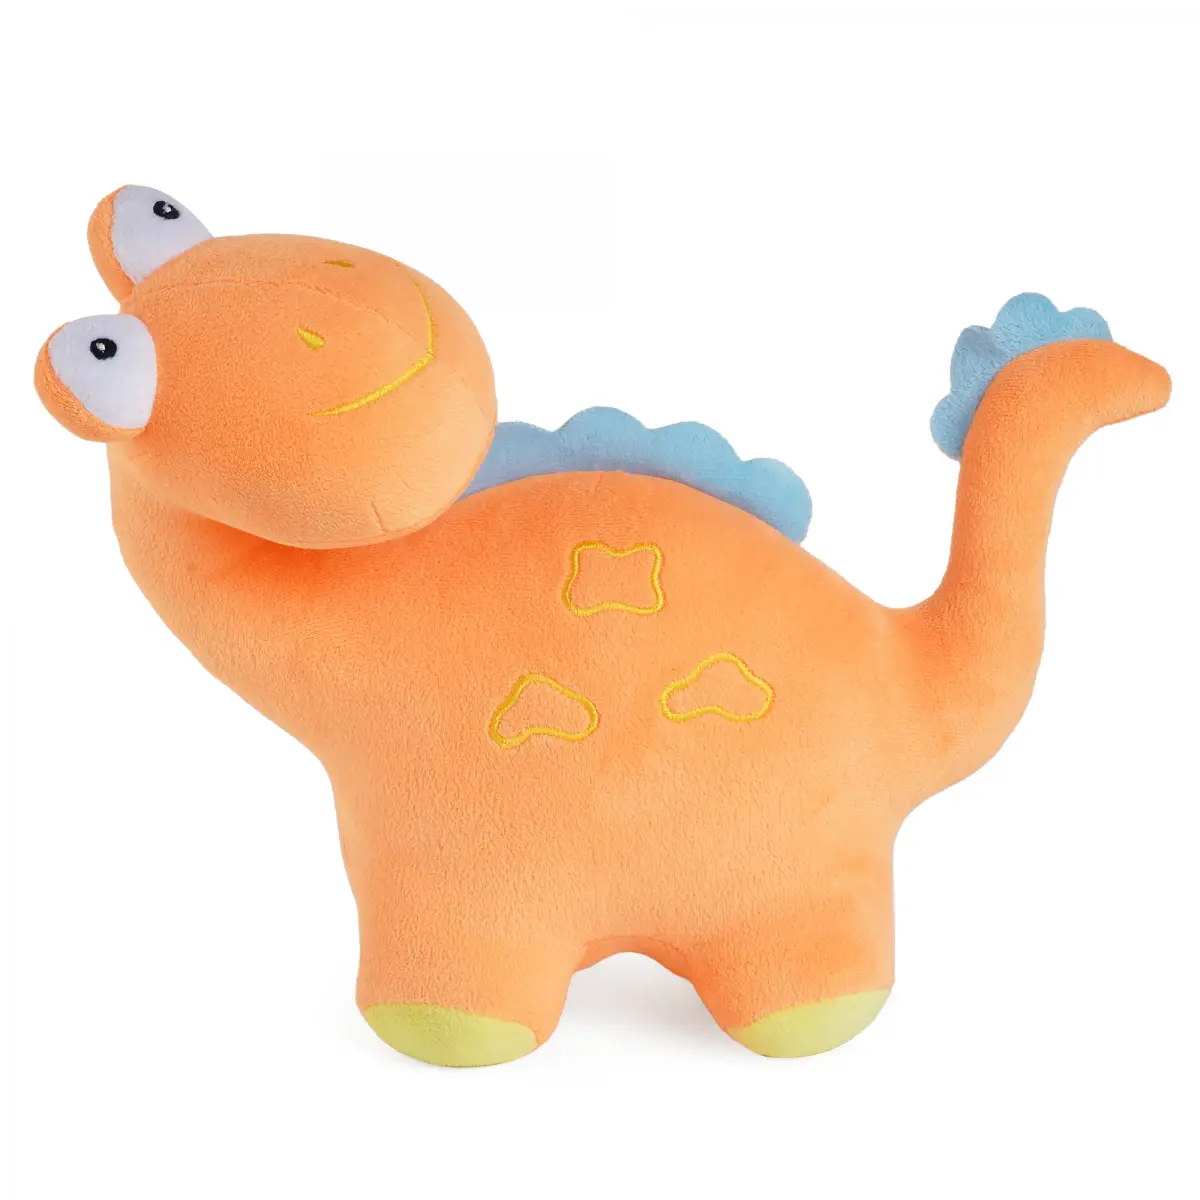 Huggable Cuddly Spiny Dino Stuffed Toy By Fuzzbuzz, Soft Toys for Kids, Cute Plushies Orange, For Kids Of Age 2 Years & Above, 26cm